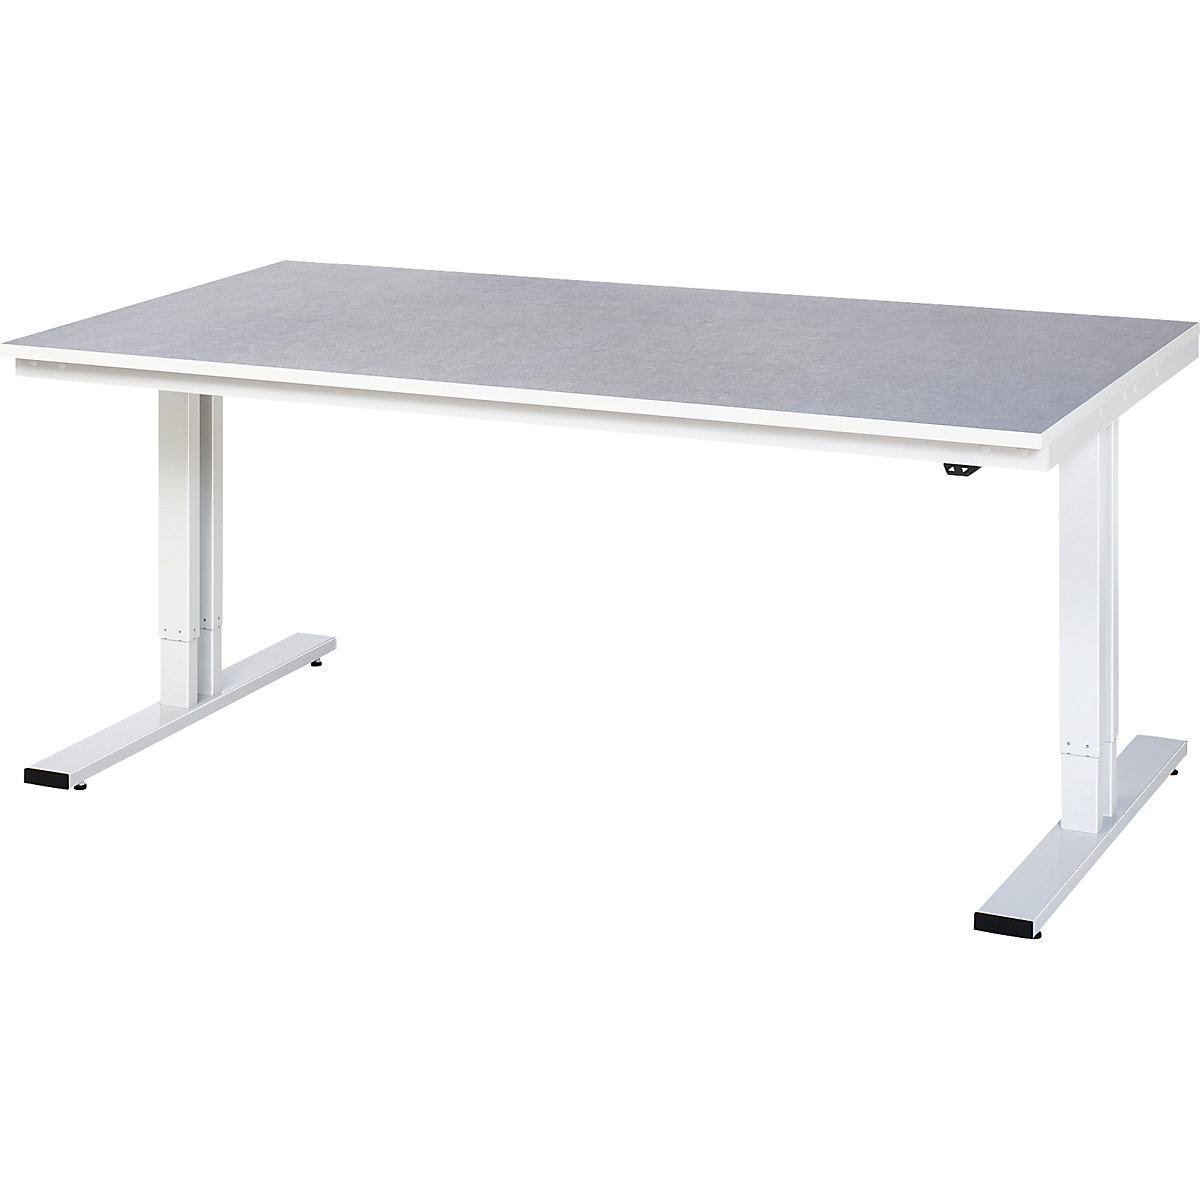 Work table, electric height adjustment – RAU, linoleum cover, max. load 300 kg, WxD 2000 x 1000 mm-13